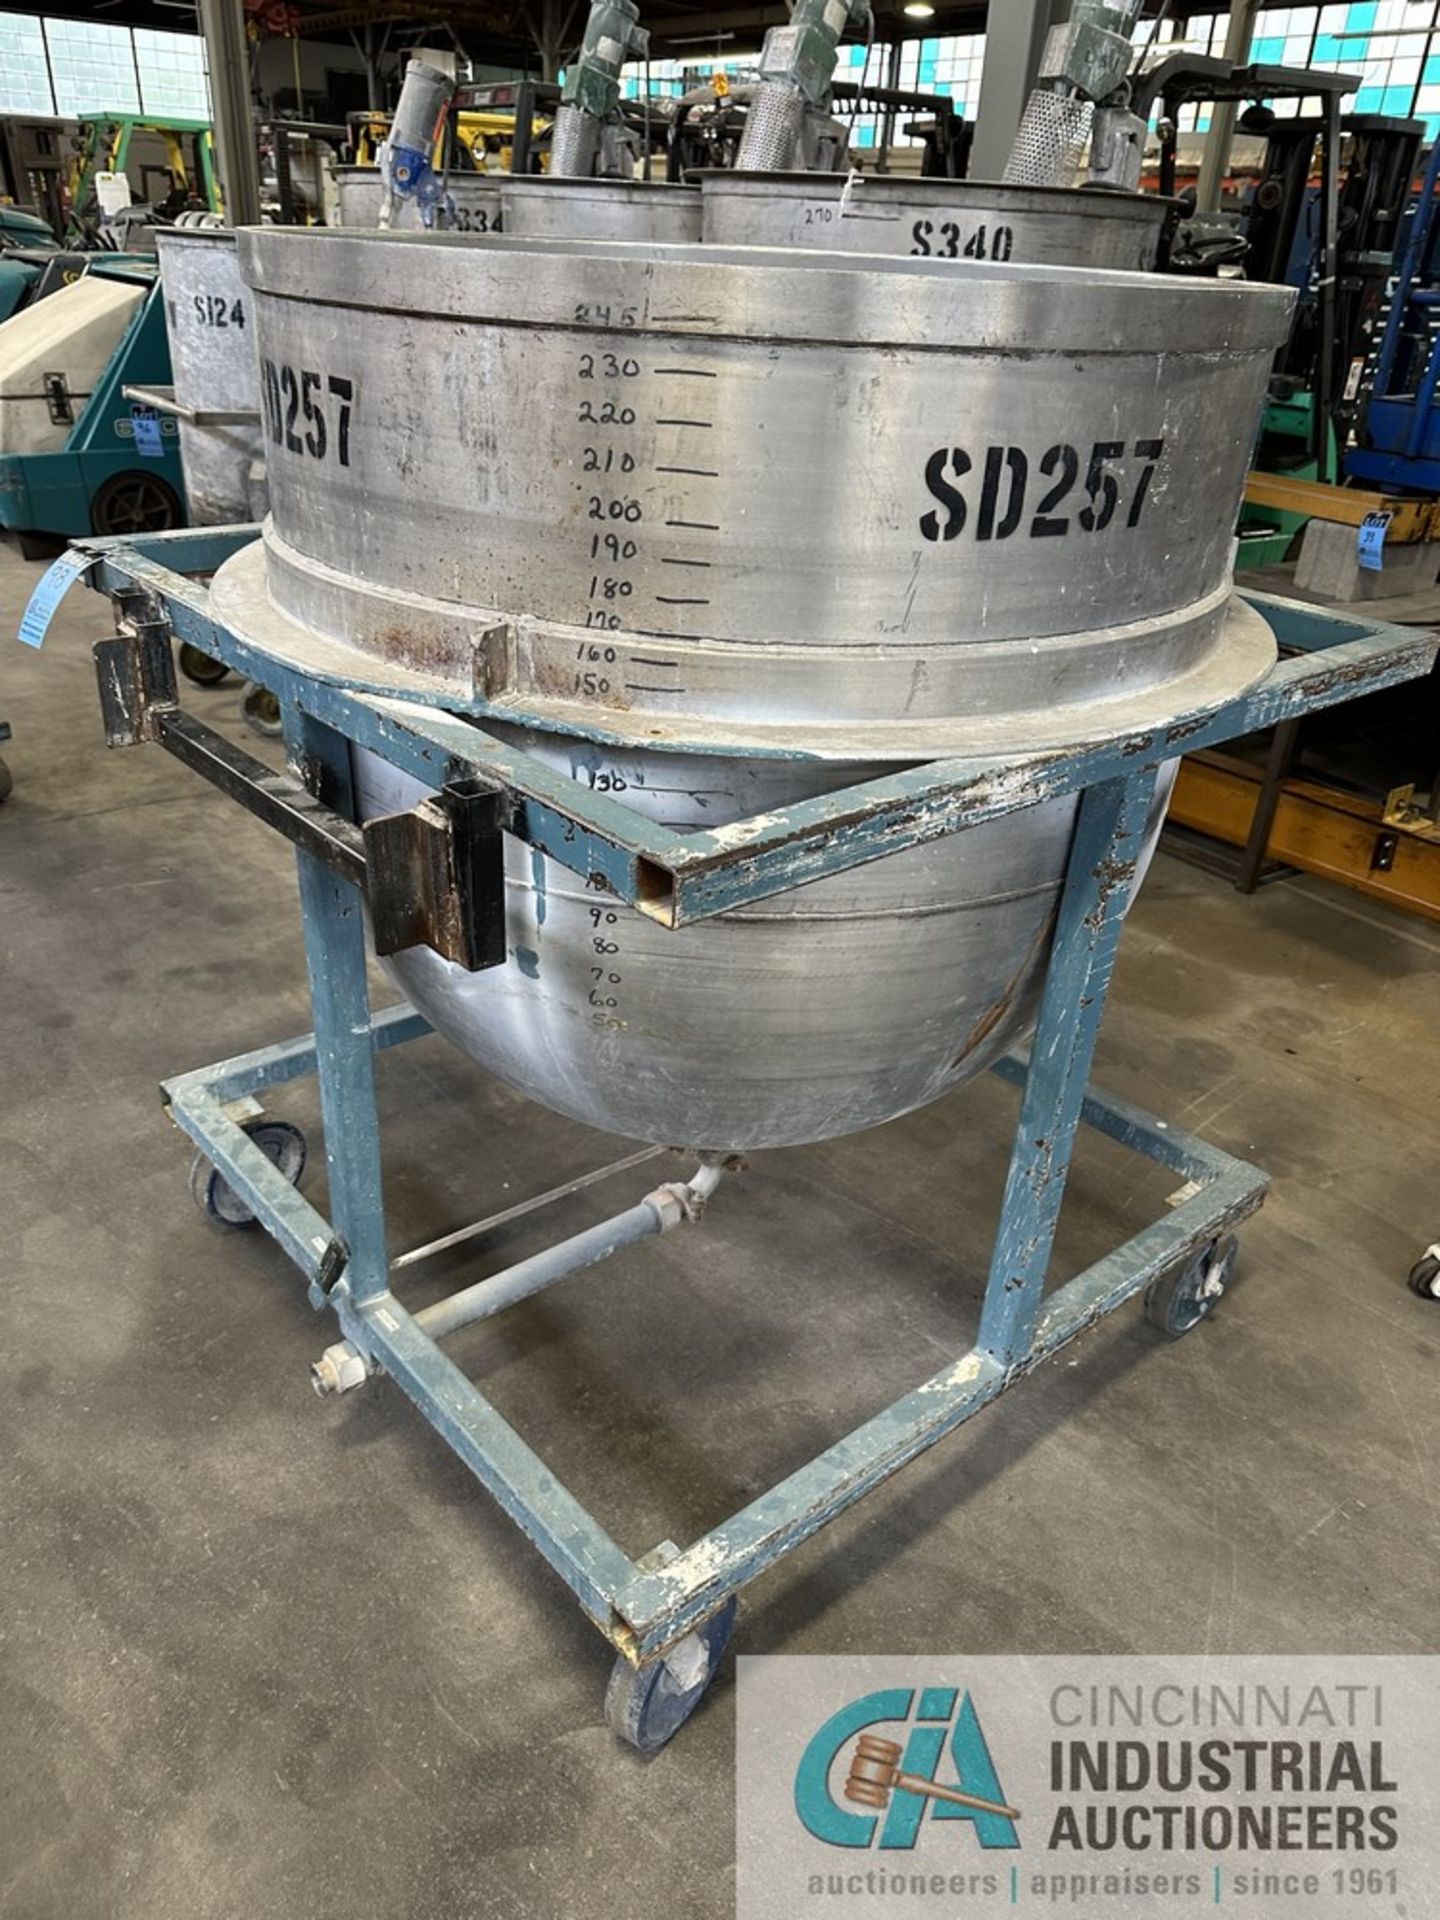 245 GALLON STAINLESS STEEL PORTABLE MIXING BOWL - Image 2 of 3